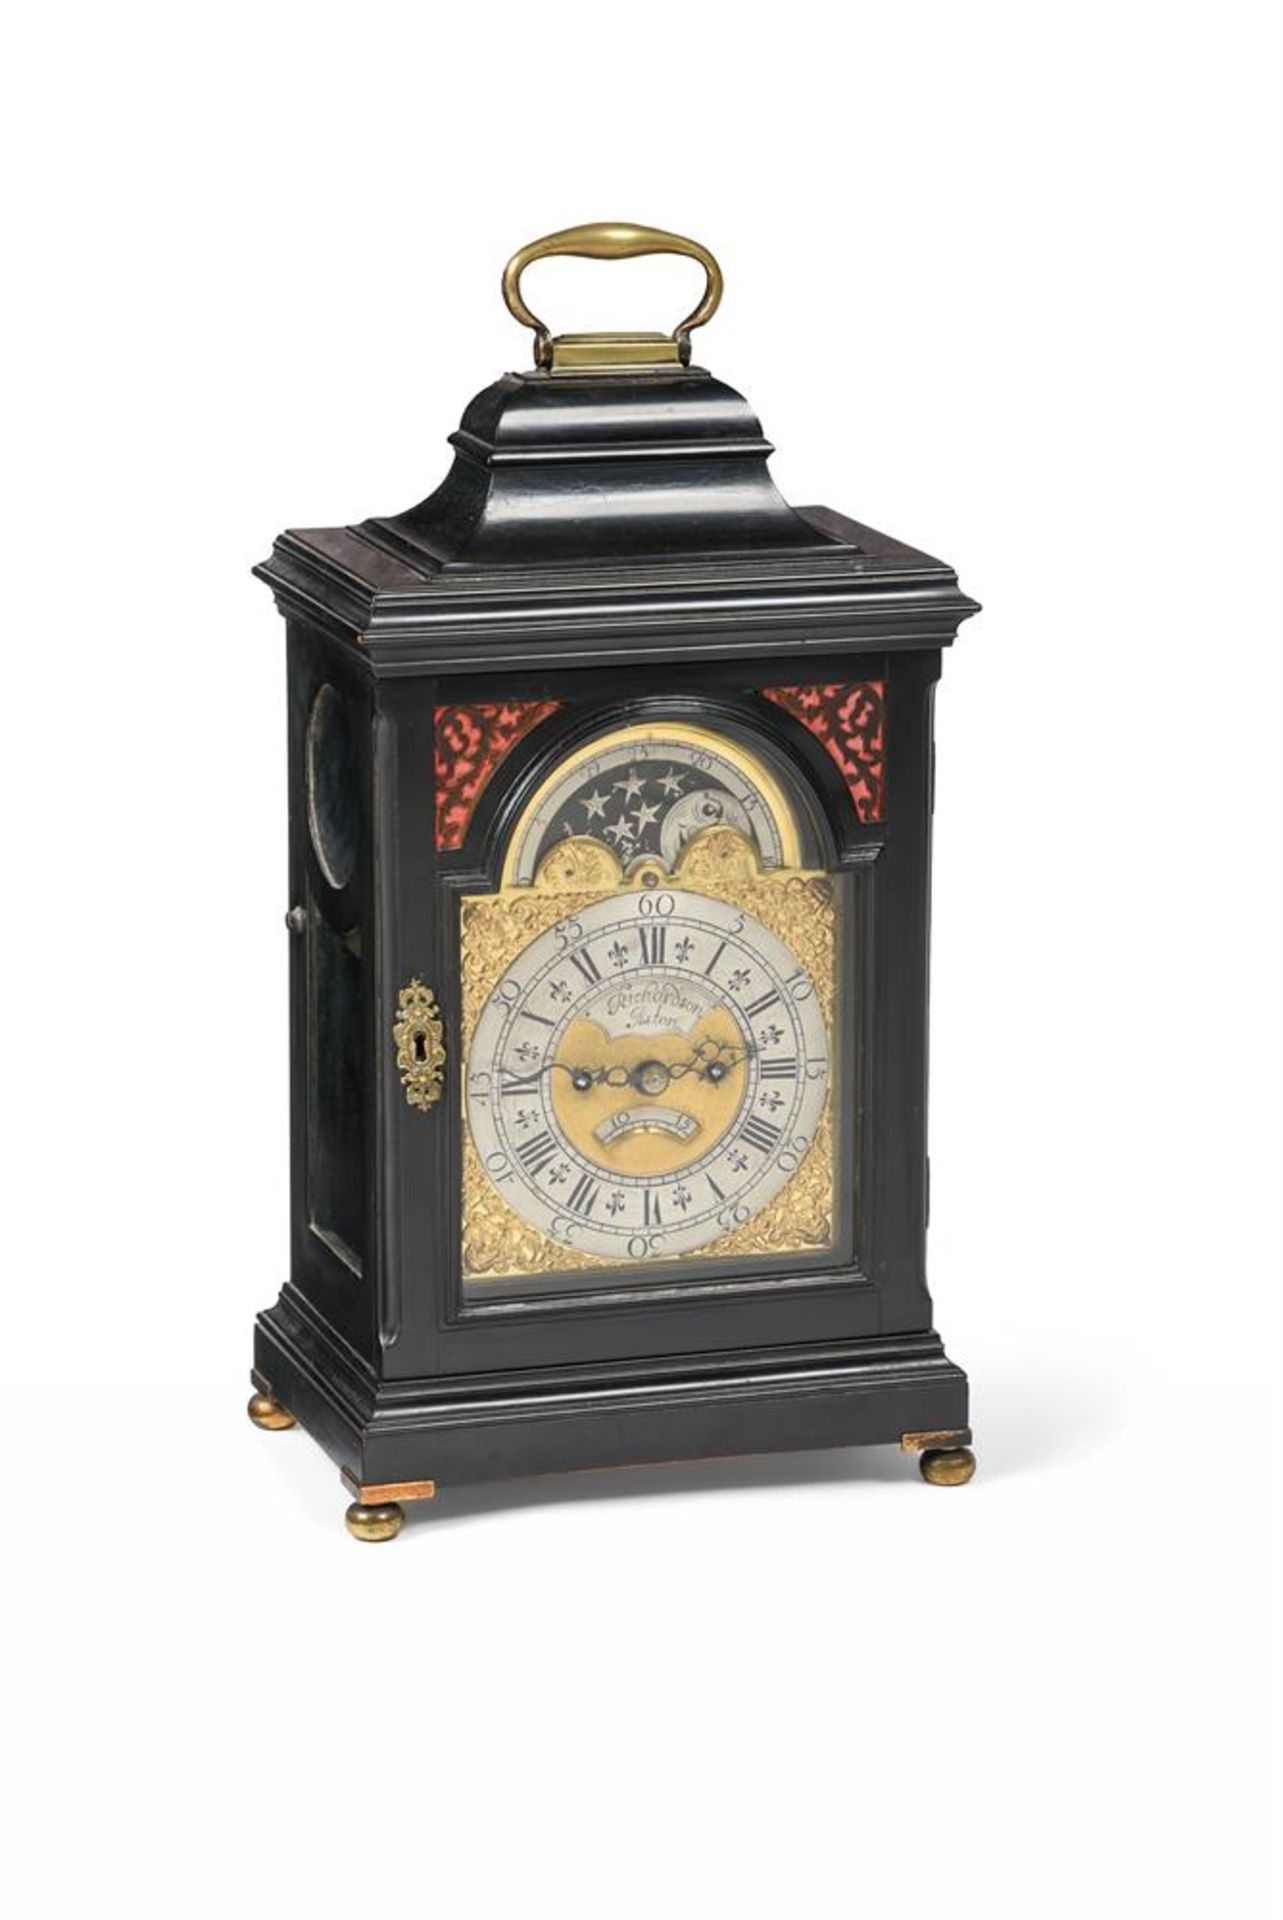 A GEORGE III STYLE EBONISED BRACKET CLOCK THIRD QUARTER OF THE 18TH CENTURY AND LATER